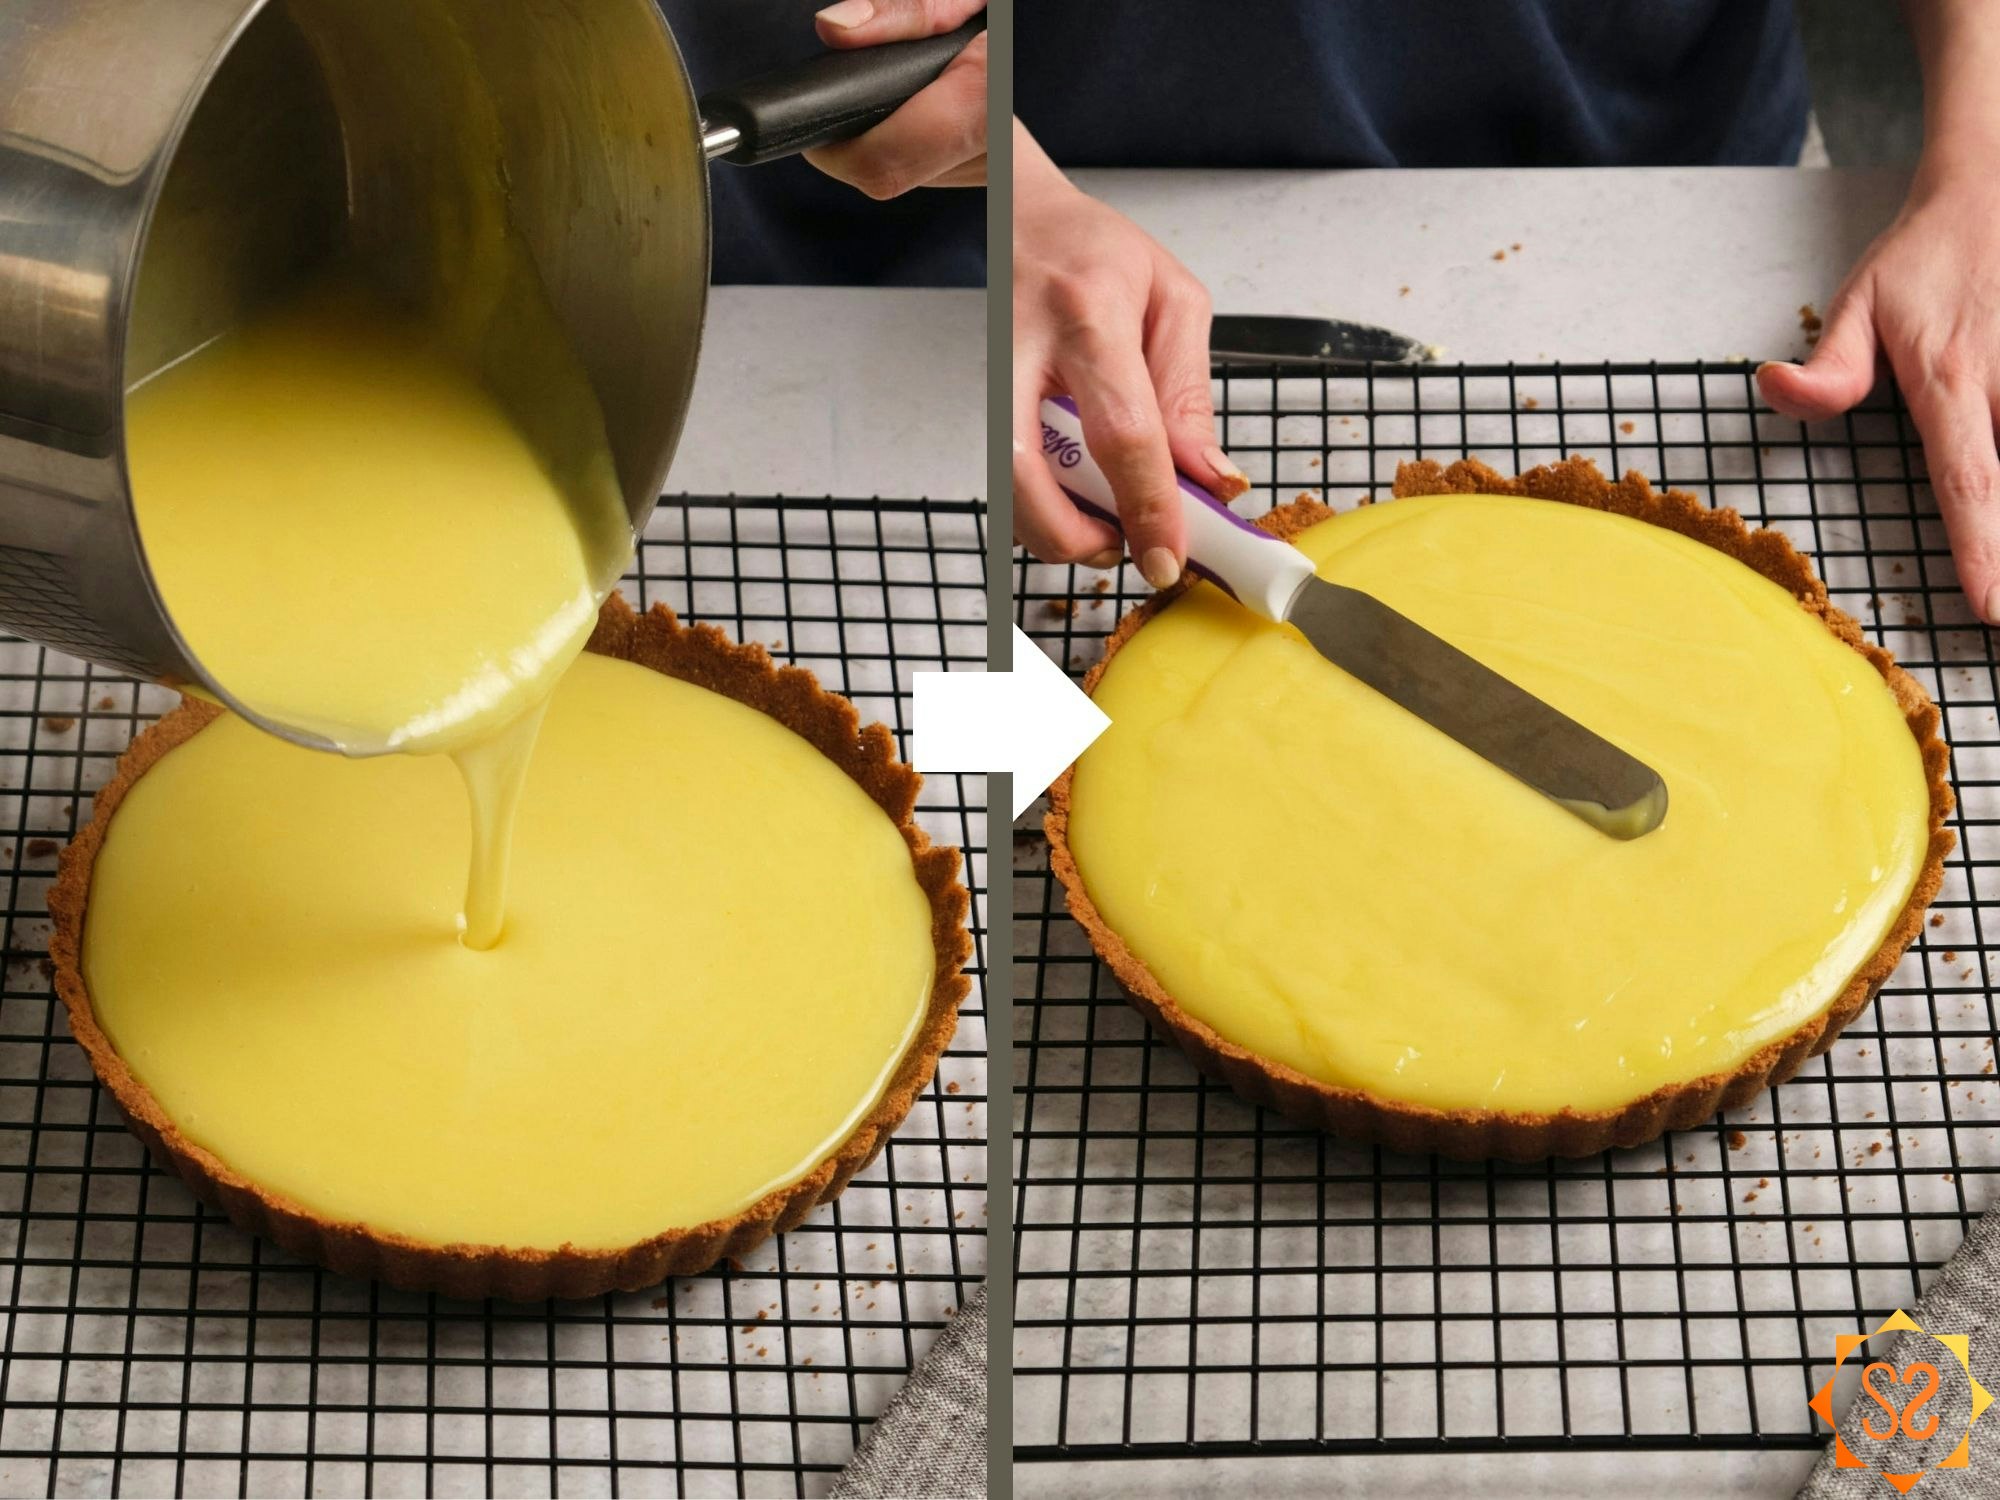 Two images showing the Key lime filling being poured into the graham cracker crust, and smoothing the top of the filling with a cake spatula.